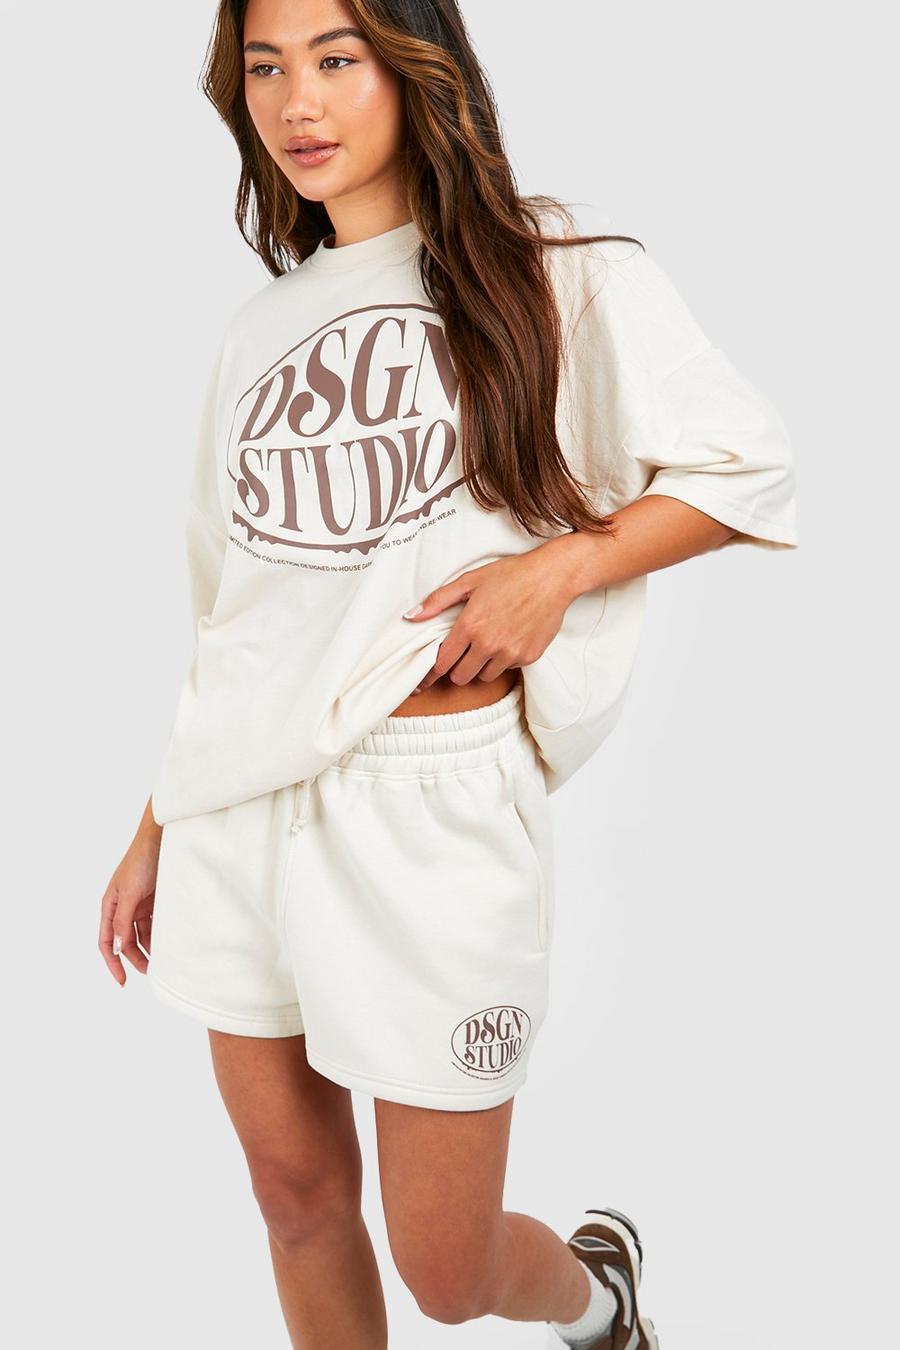 Stone Dsgn Studio Graphic T-Shirt And Short Set image number 1